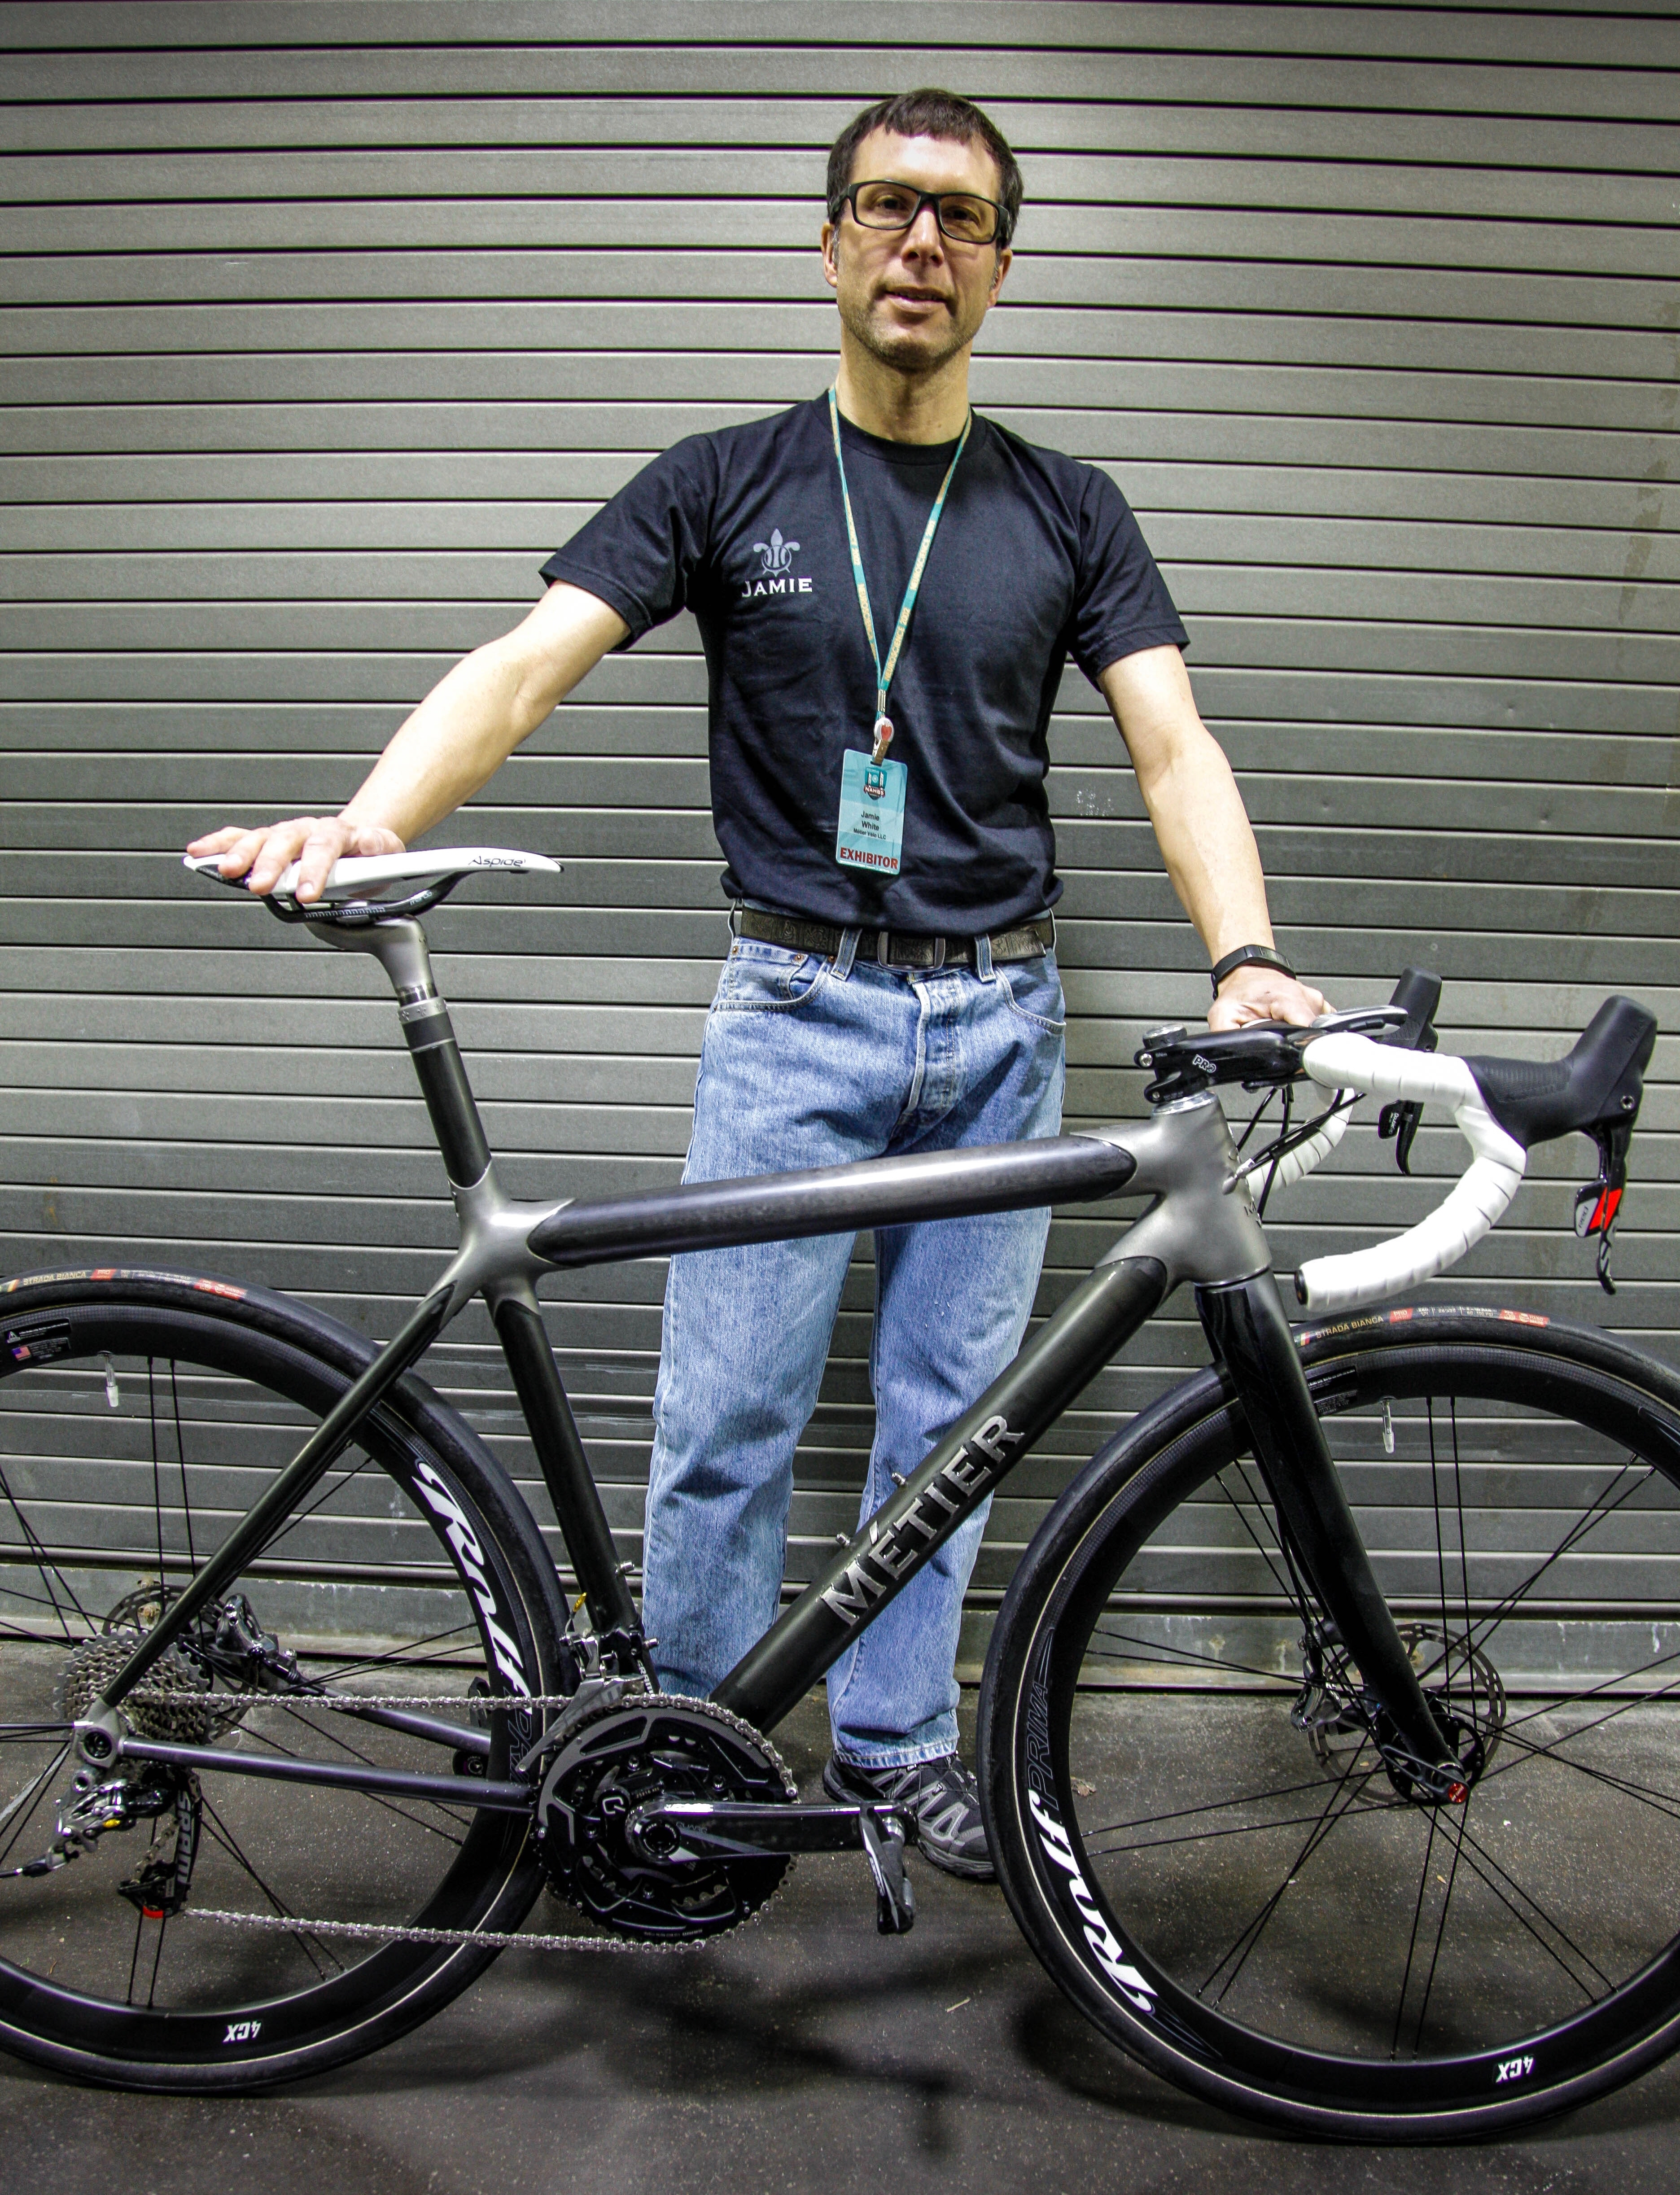 Jamie at NAHBS2016 with the Winter Training Bike.